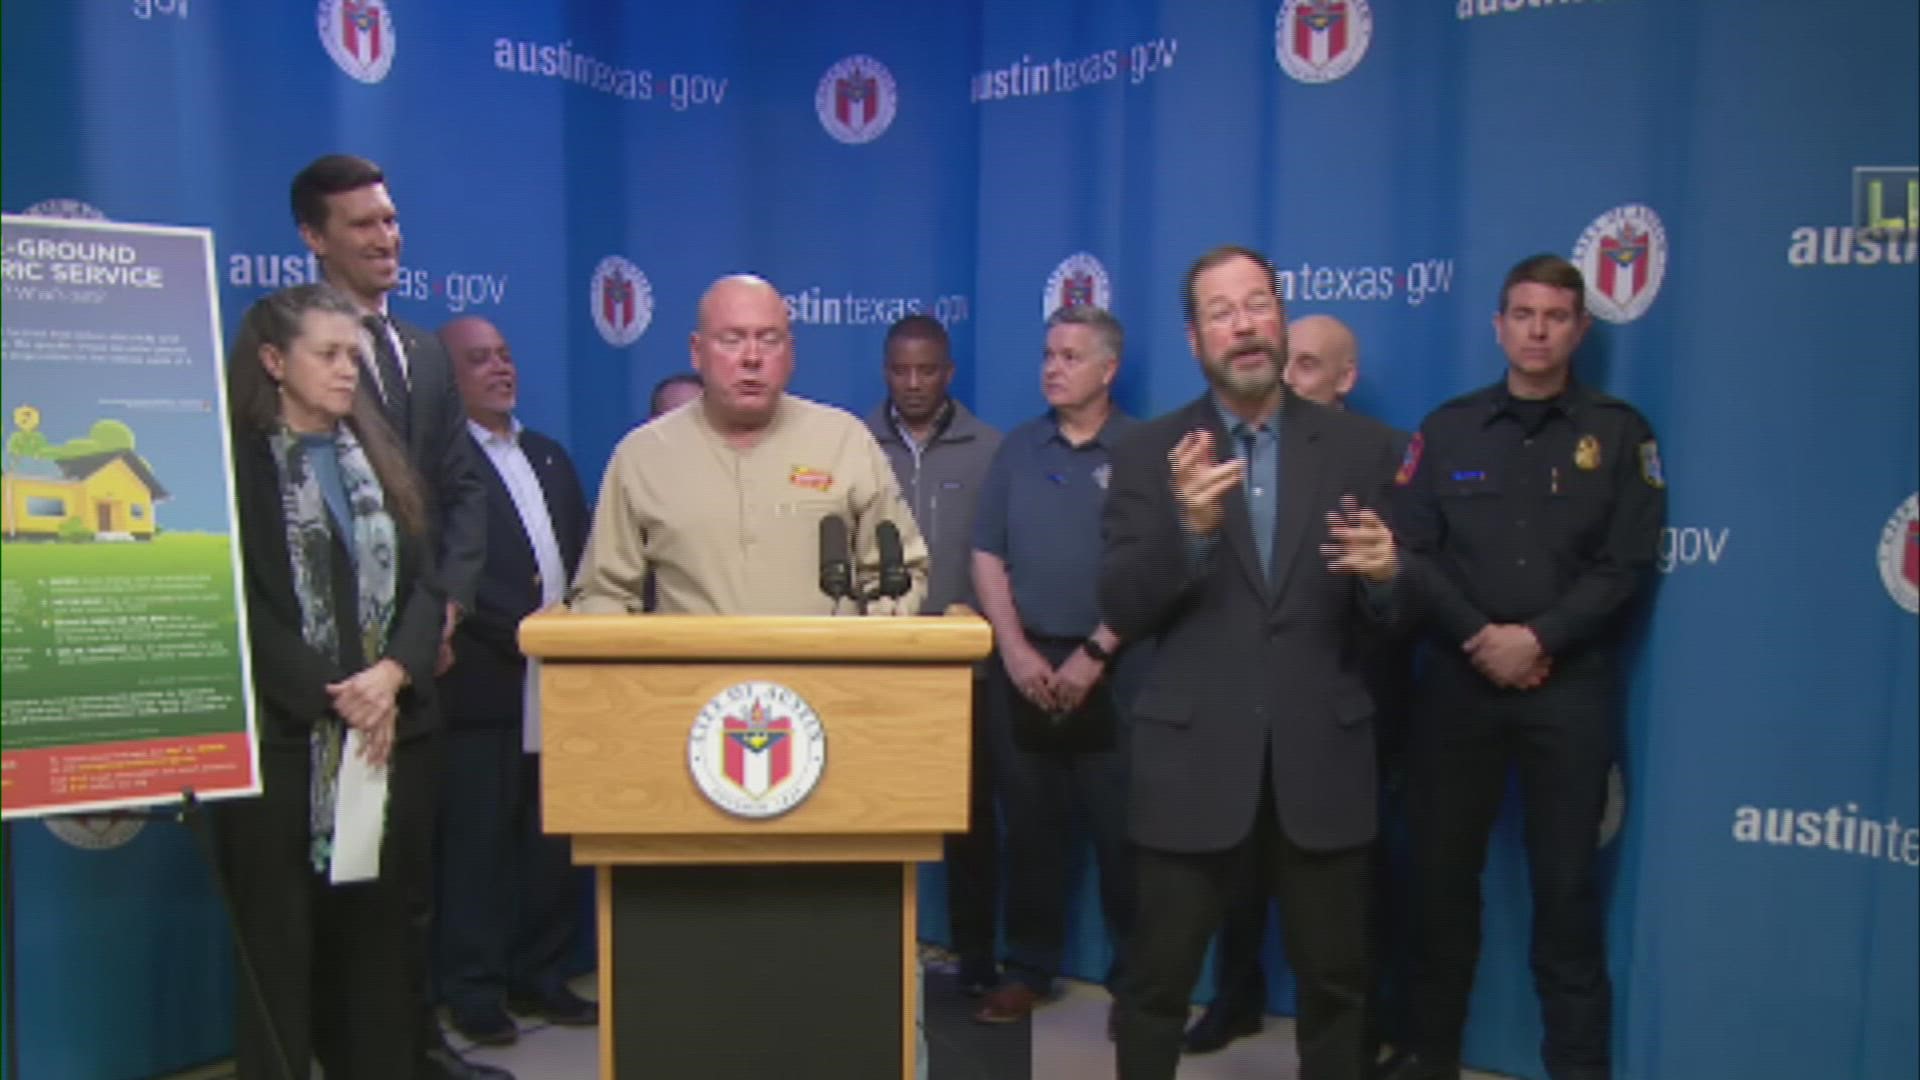 City officials provided an update on road, power and other restoration efforts being made to help bring the City back to normal after the ice storm.